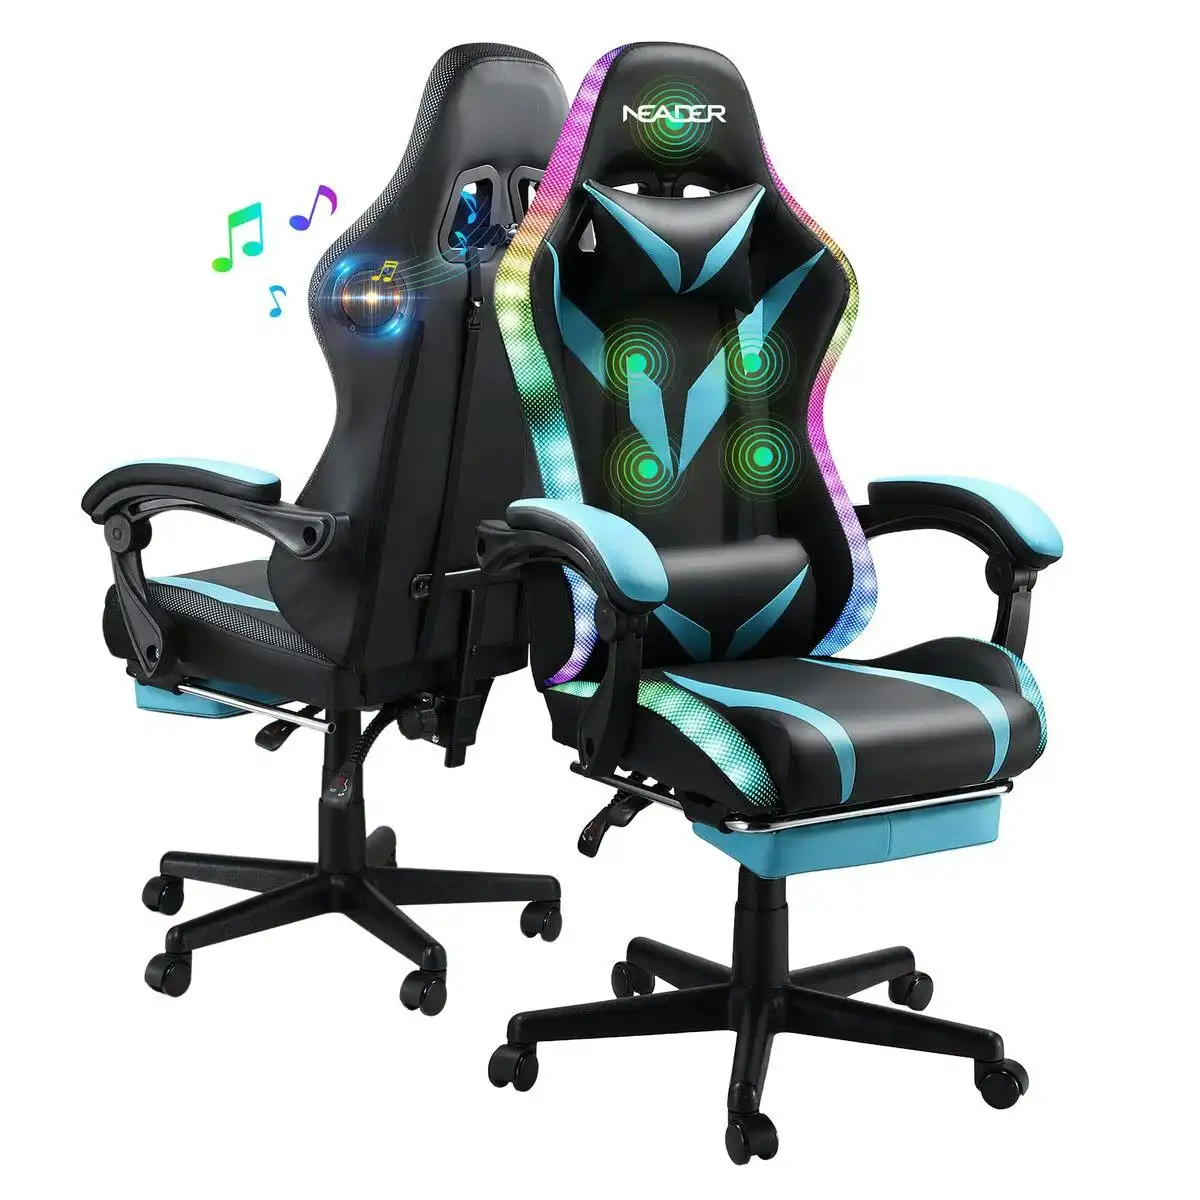 Neader RGB LED Gaming Chair Home Office Computer Racing Desk Massage Seat Bluetooth Speaker PU Leather High Back Recliner Headrest Footrest Black